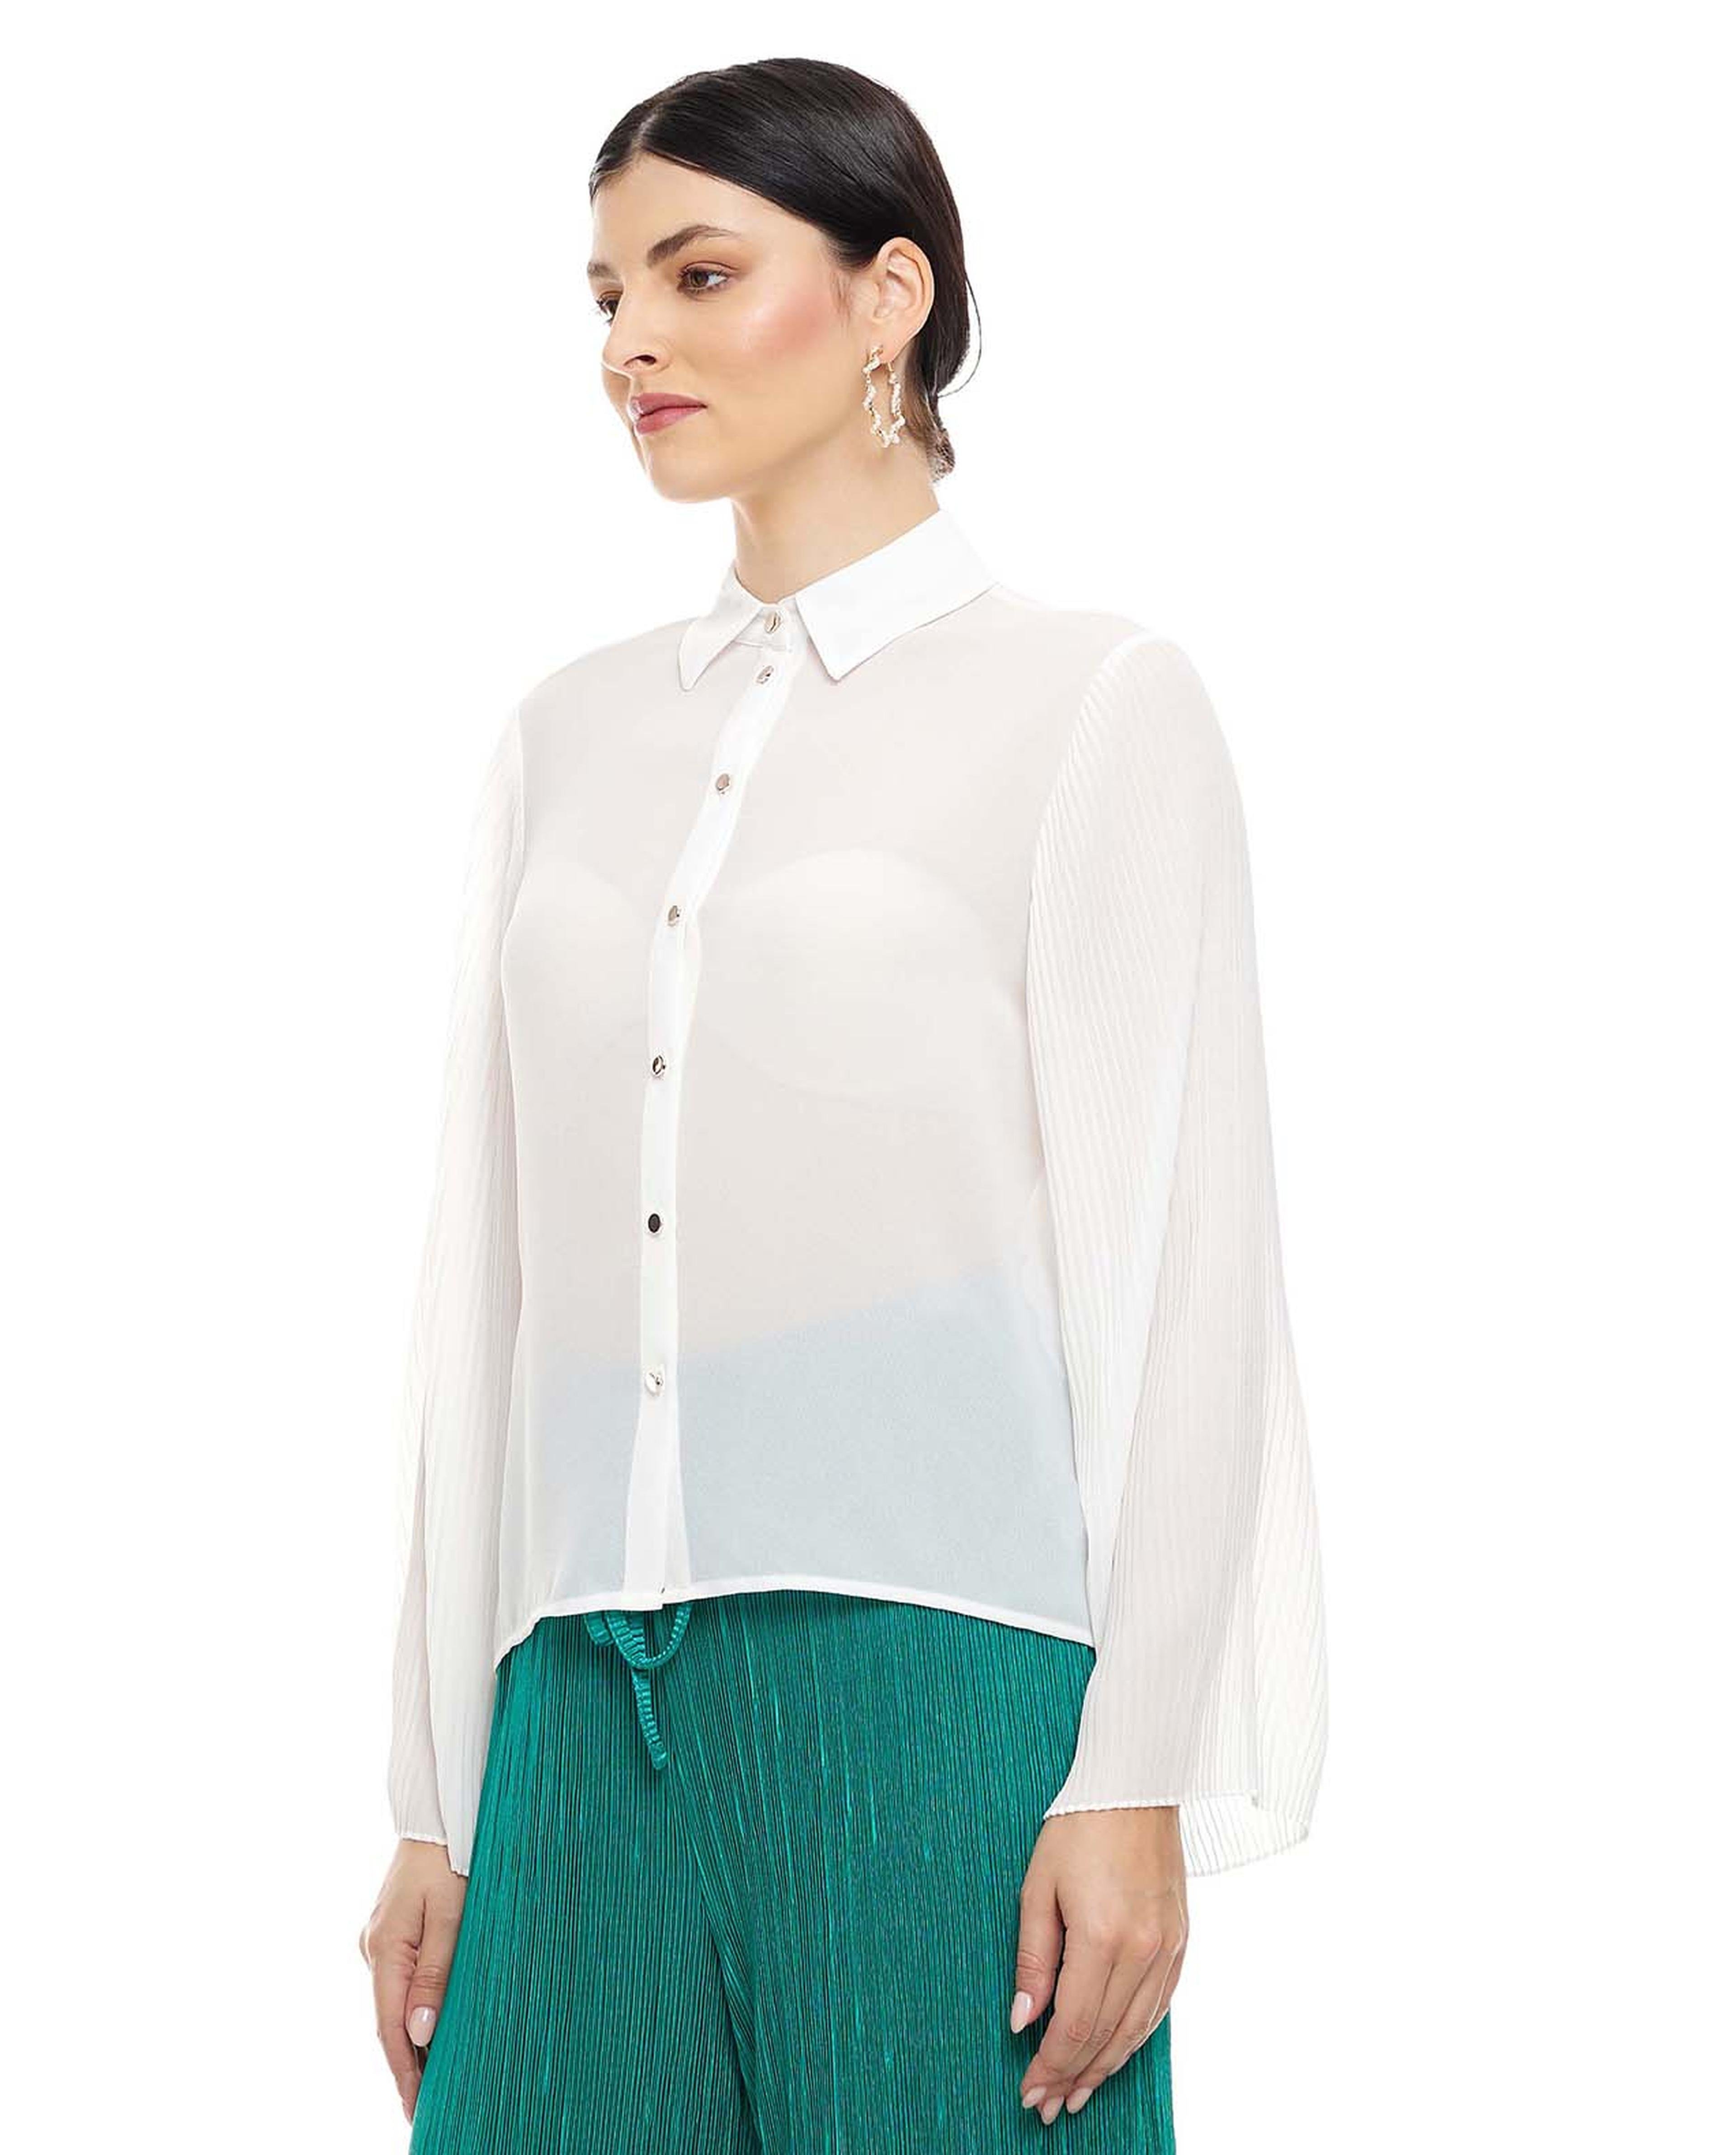 Solid Shirt with Classic Collar and Flared Sleeves